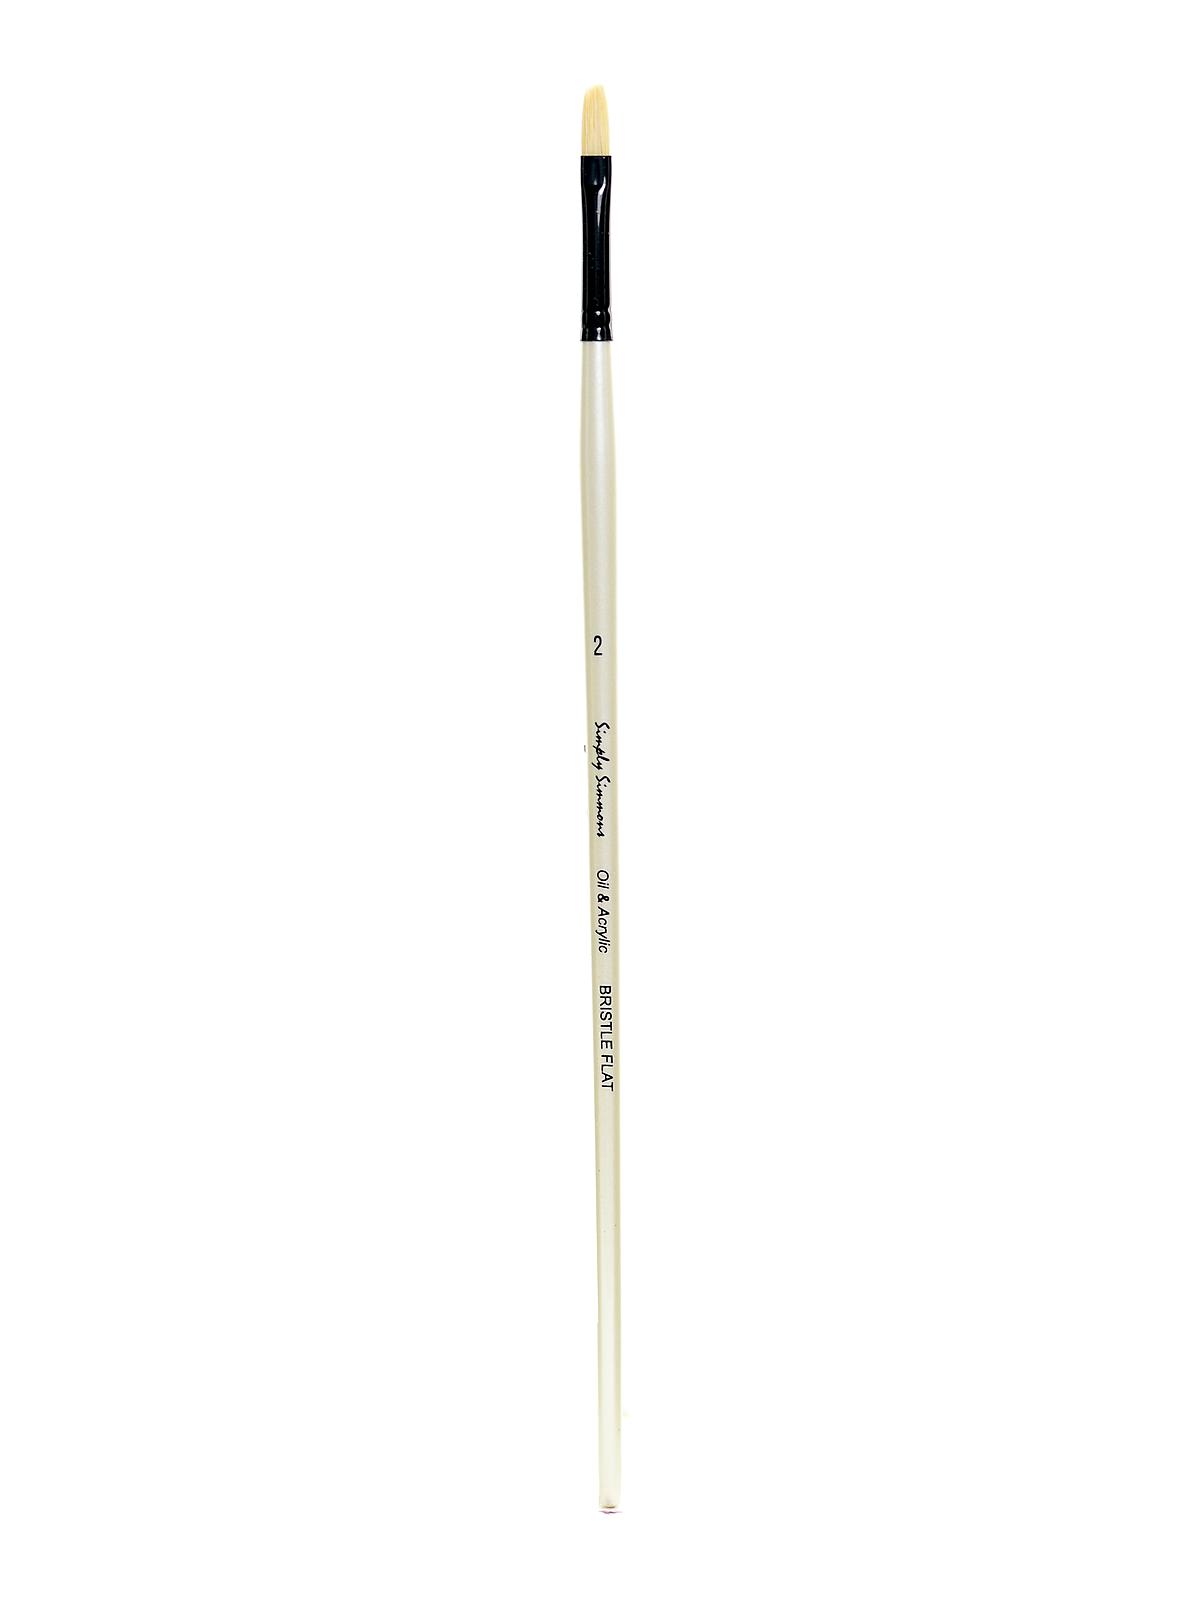 Simply Simmons Long Handle Brushes 2 Bristle Flat